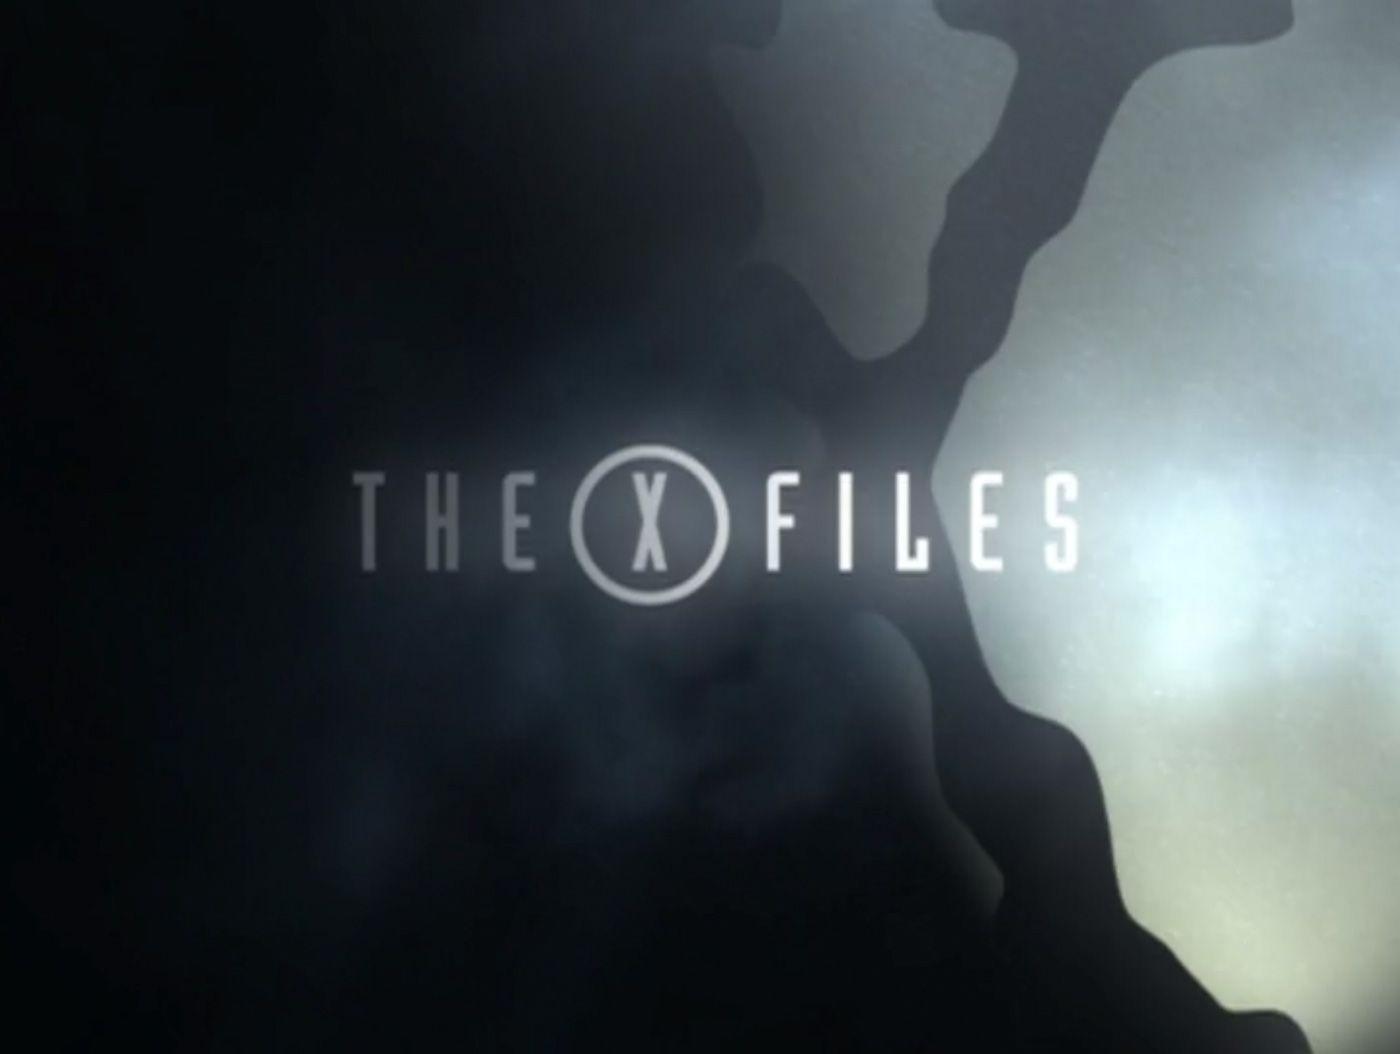 X-Files Logo - The X-Files main title - Fonts In Use